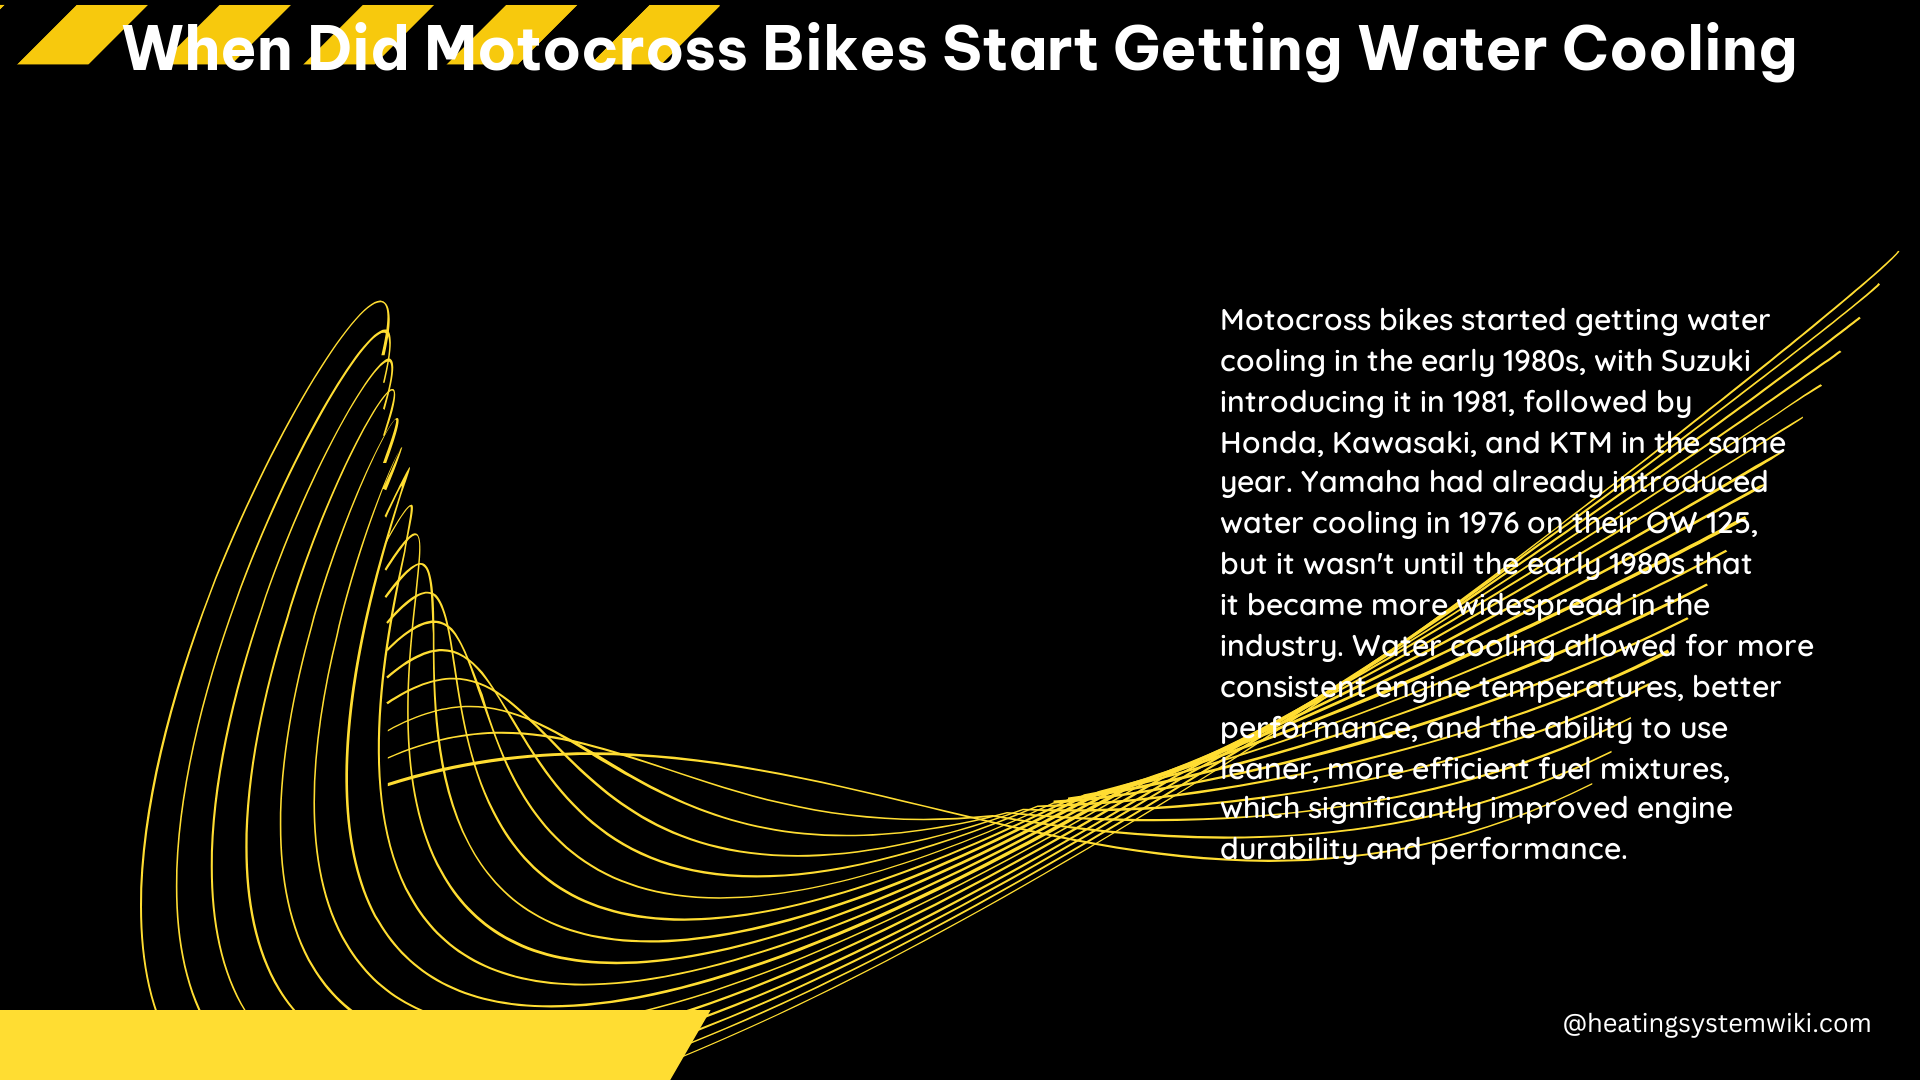 When Did Motocross Bikes Start Getting Water Cooling